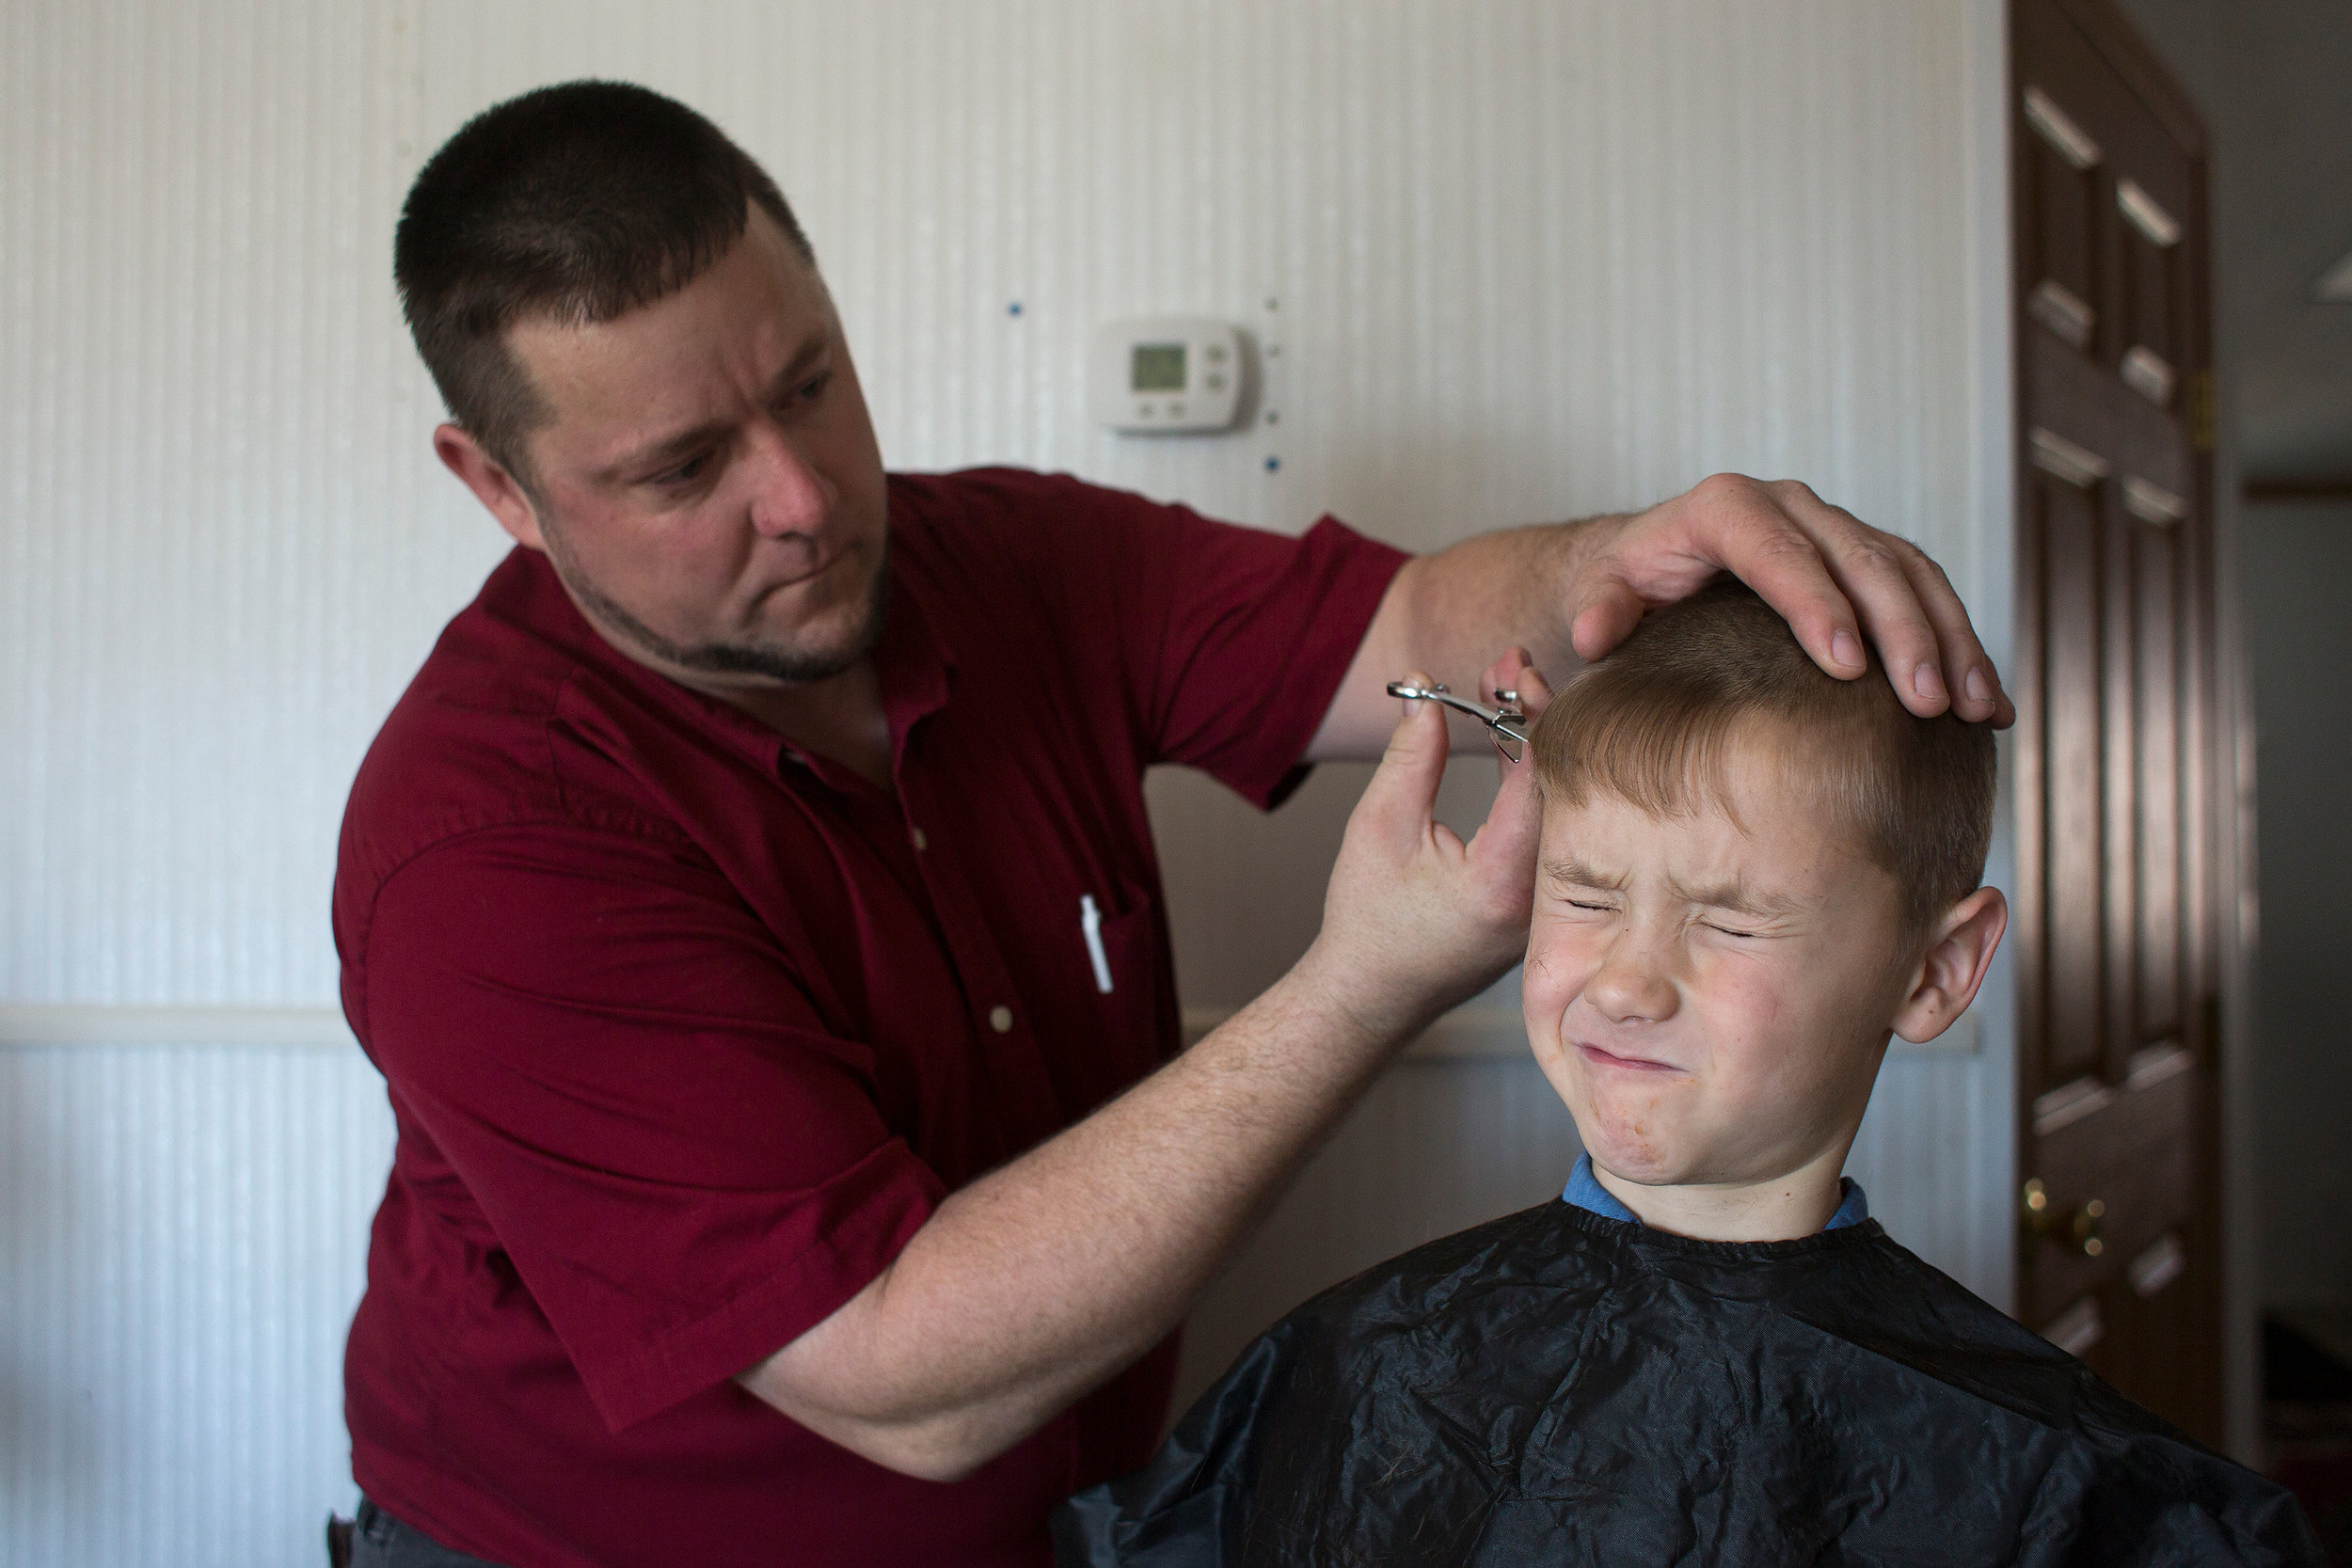  Stanley, who cuts the hair of all five of his sons, trimmed Tyler’s hair Dec. 16. “A lot of the Amish and Mennonites cut their own hair,” Stanley said. “It’s very rare to see any Mennonites or Amish go to a barber.” Shannon said that as a general ru